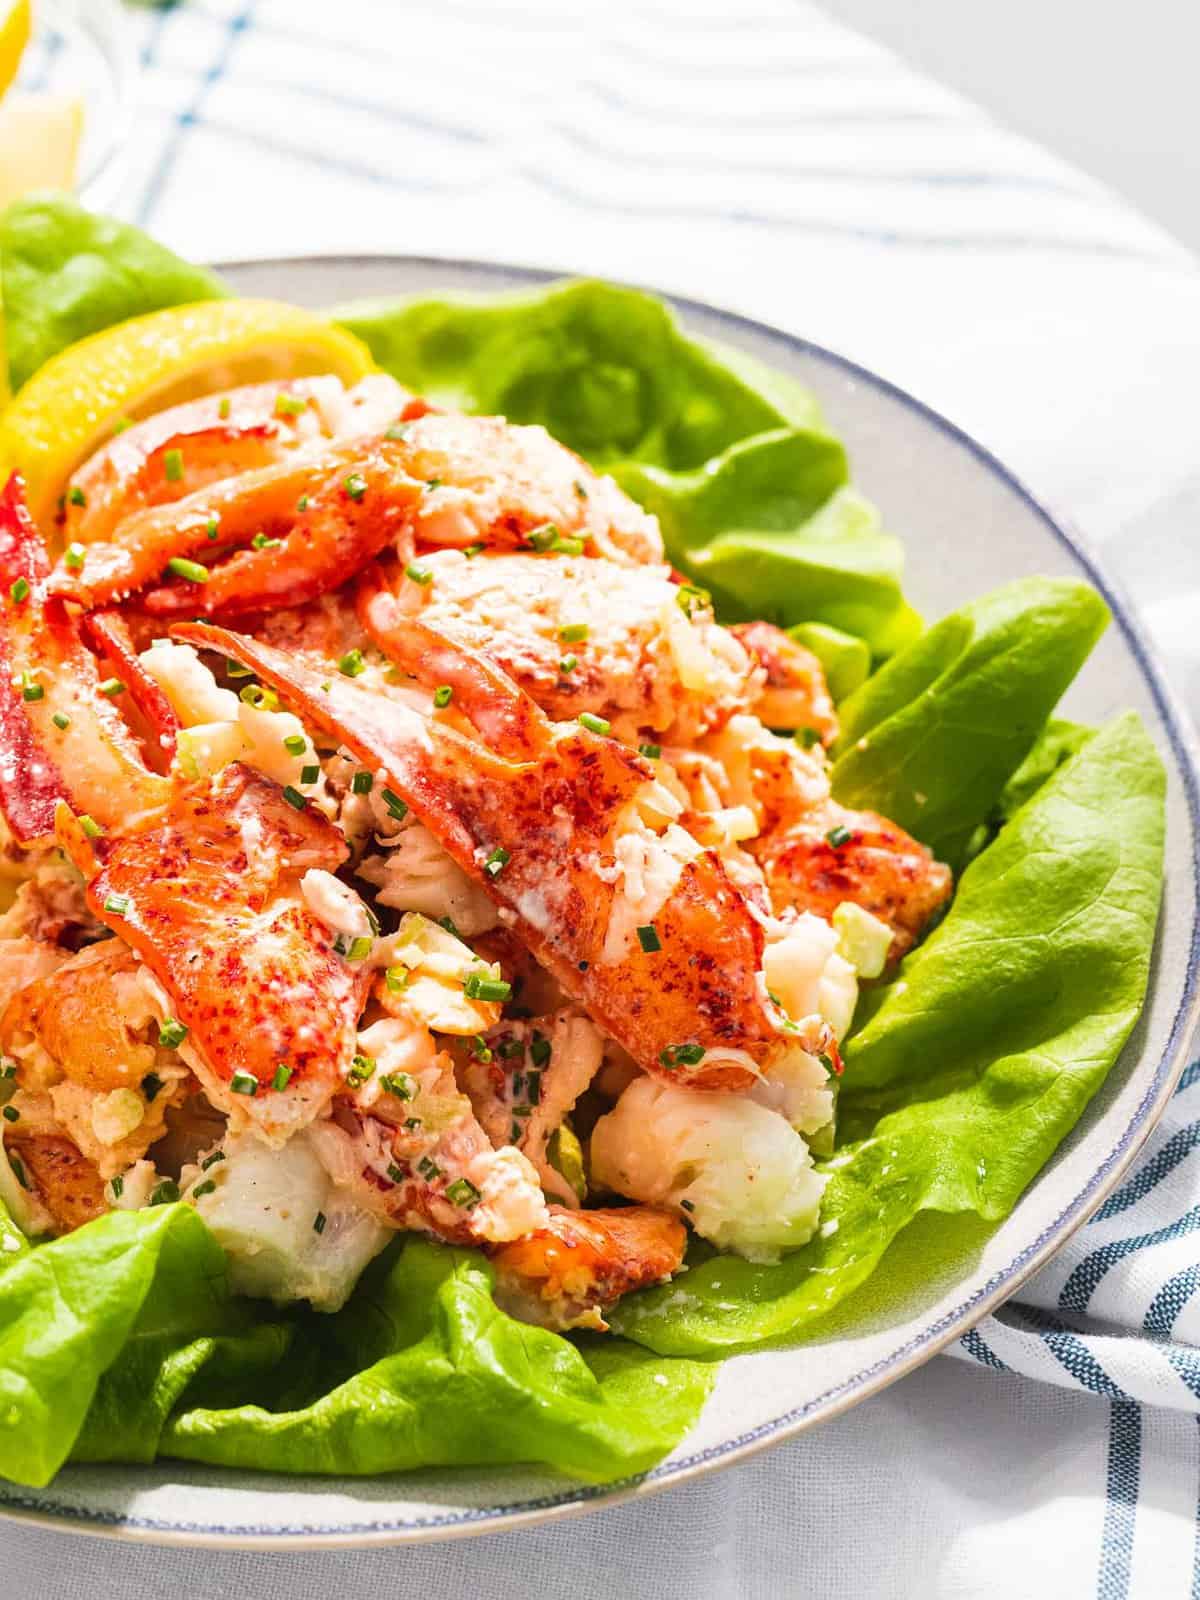 Lobster salad with light dressing on a bed of lettuce.